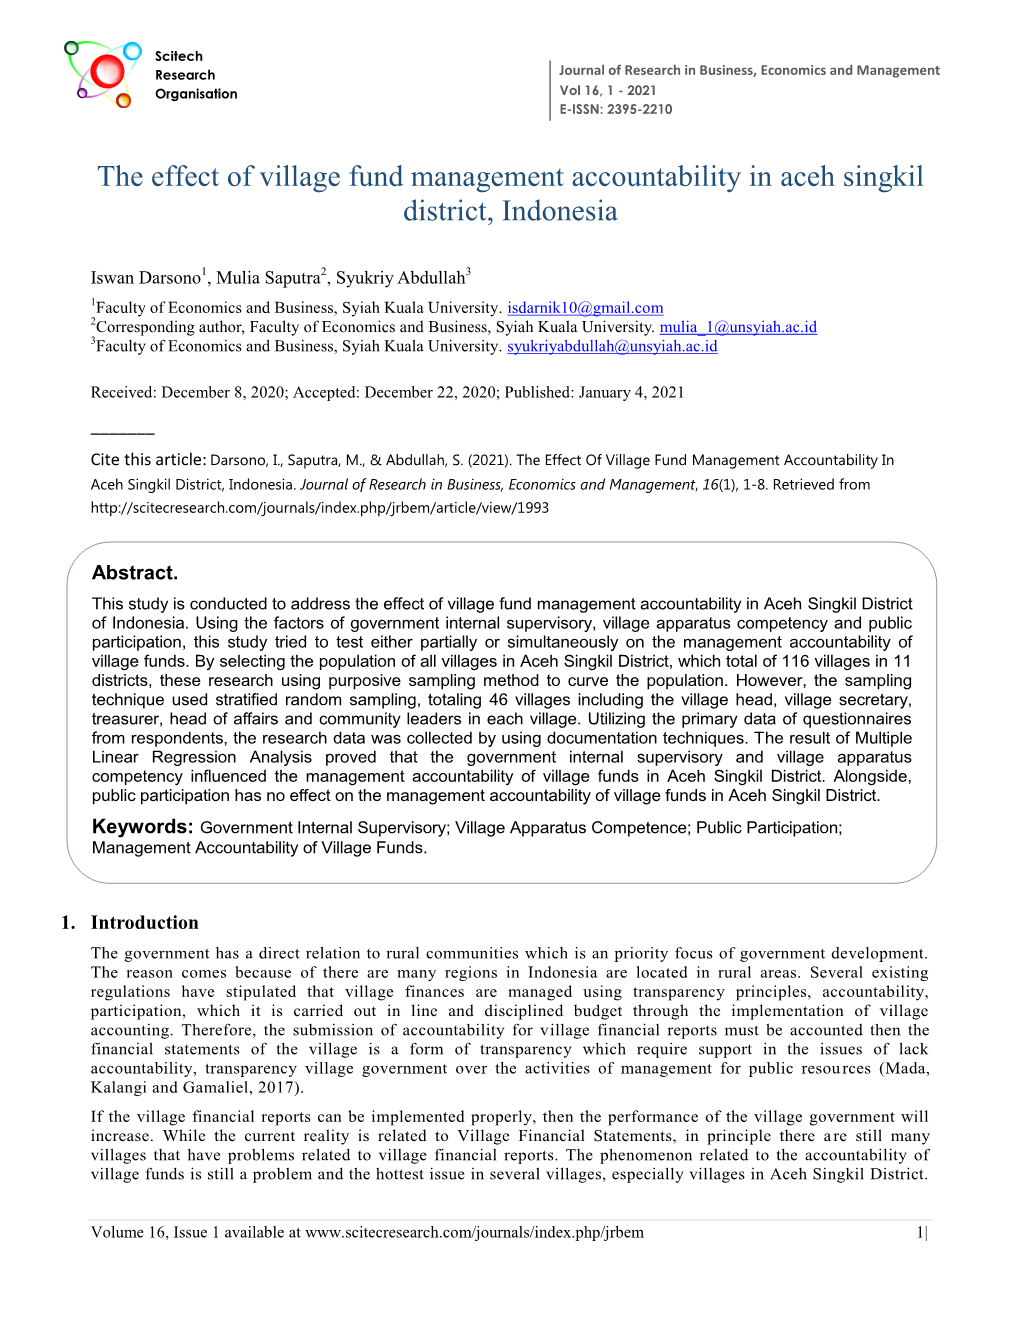 The Effect of Village Fund Management Accountability in Aceh Singkil District, Indonesia